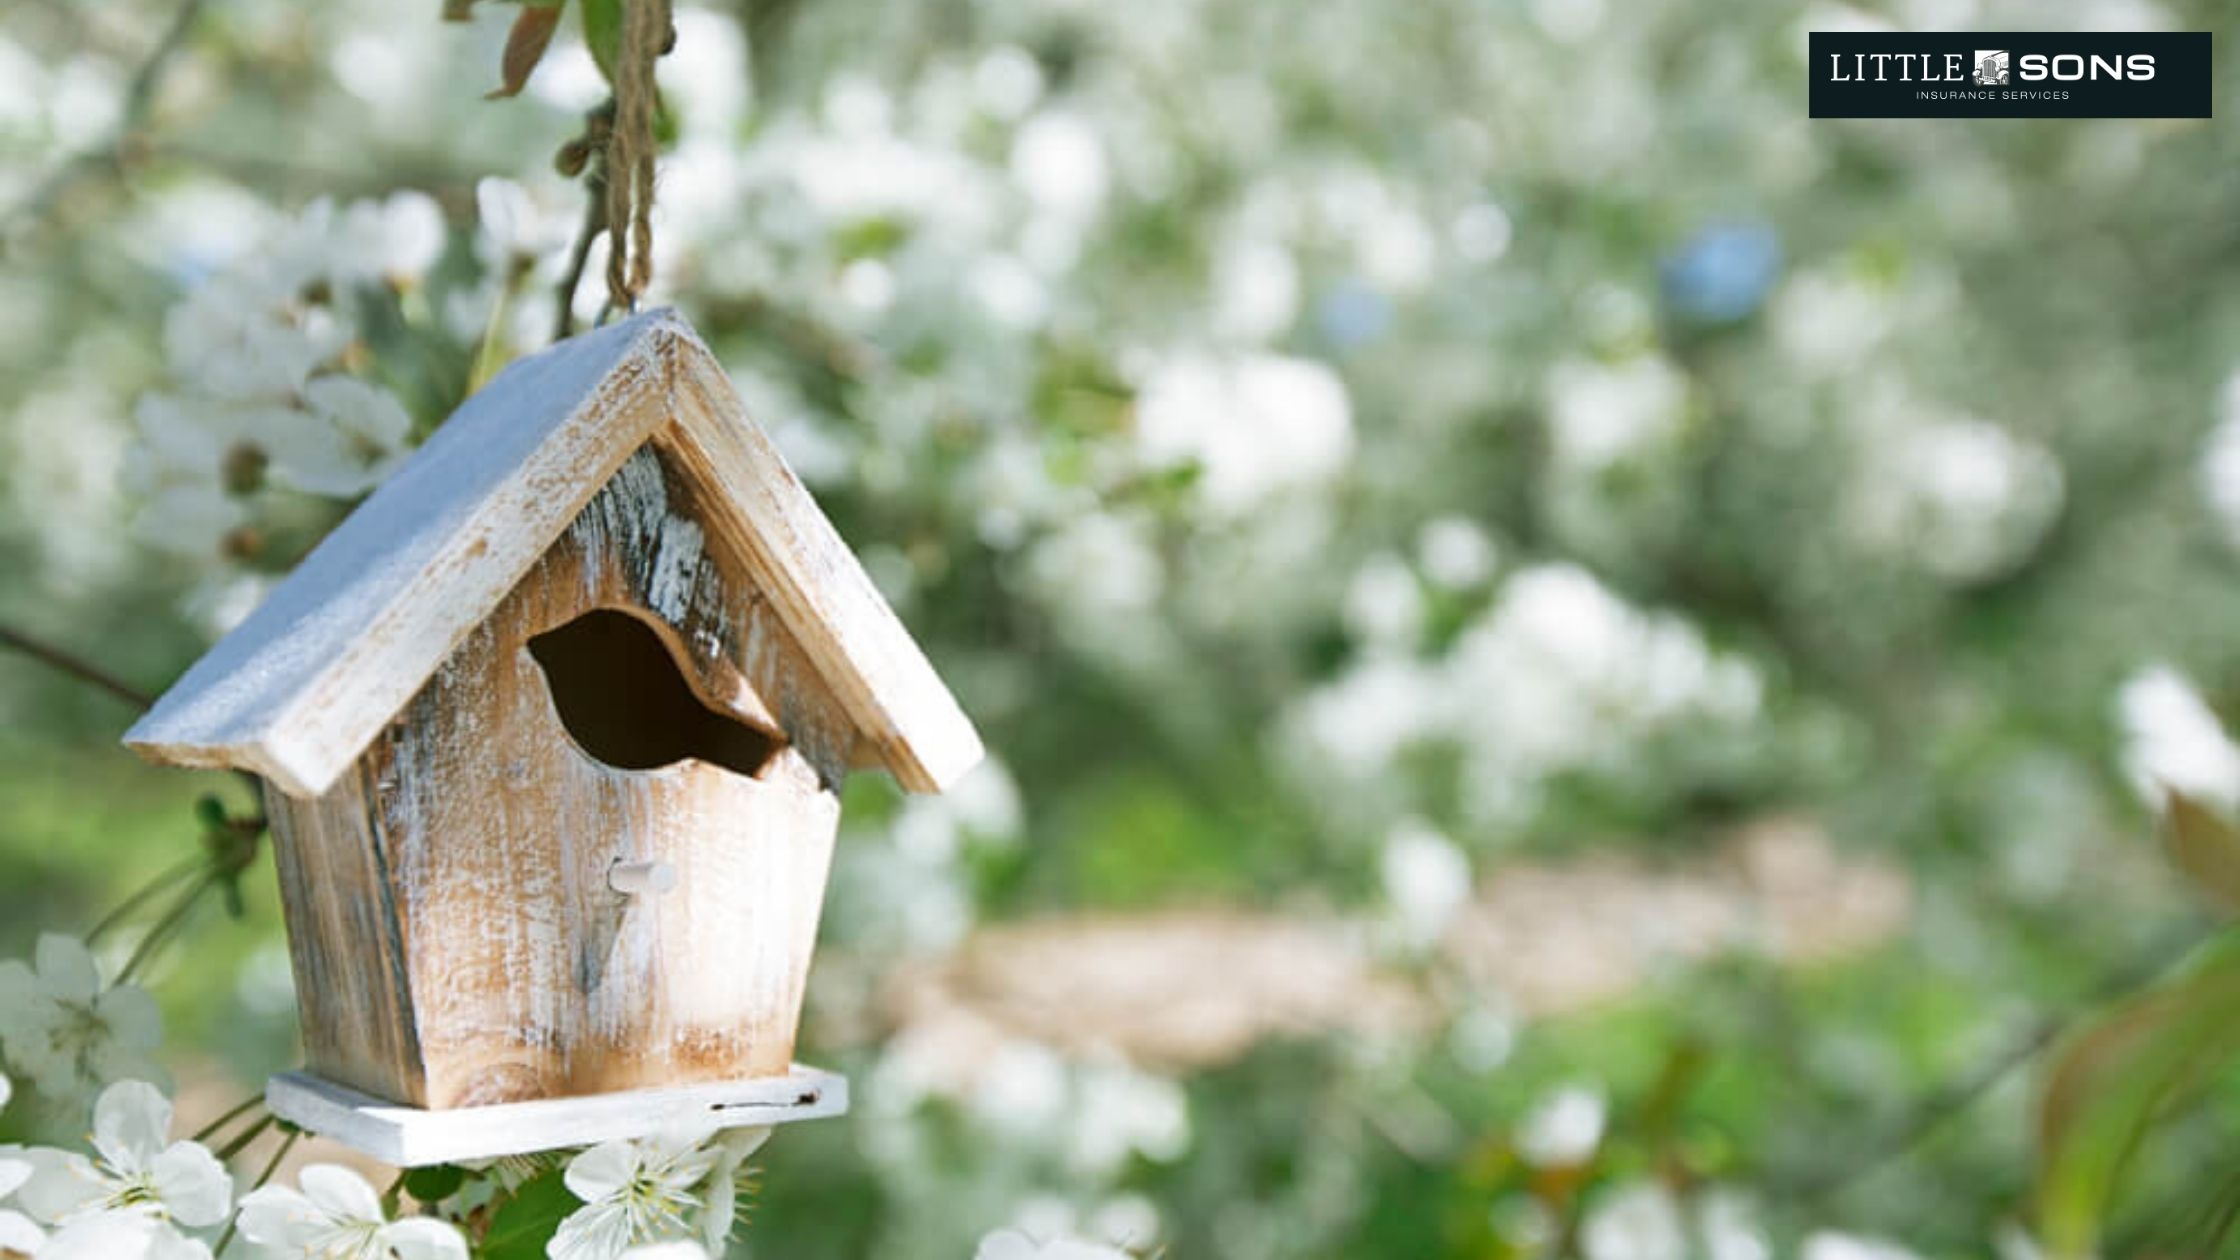 5 Tips to Get Your Home Ready for Spring